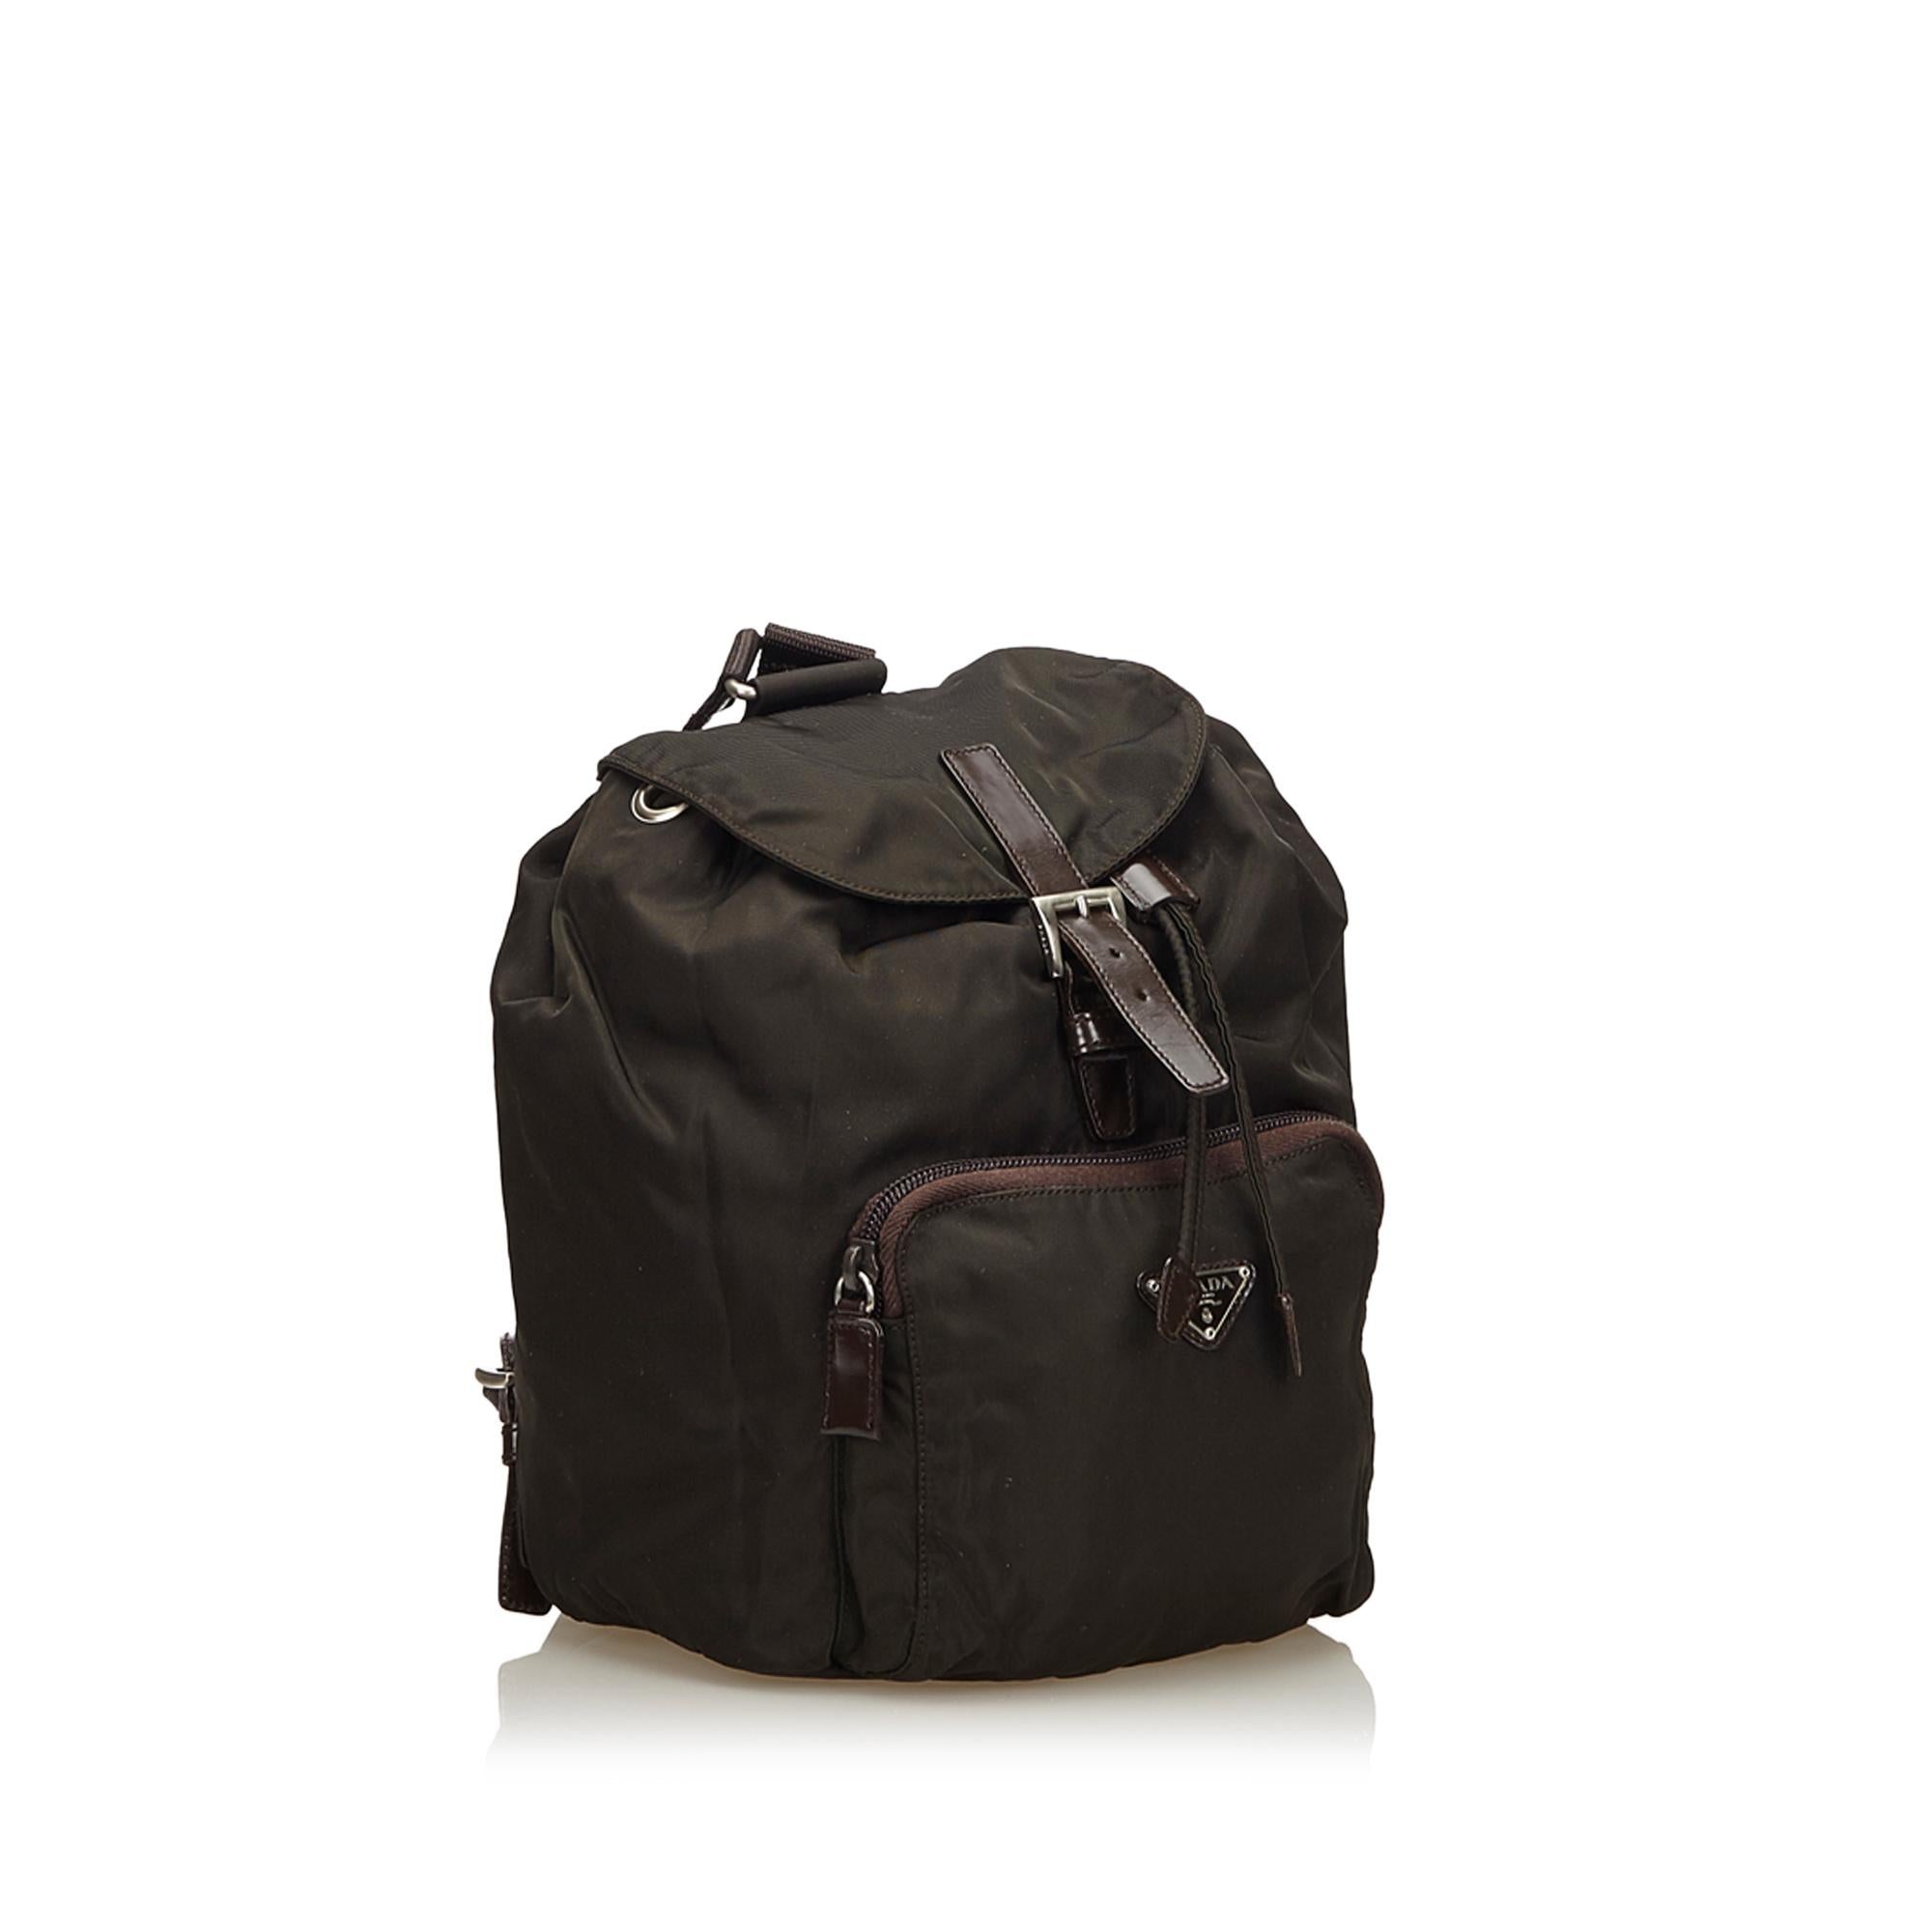 This backpack features a nylon body, flat back straps, top flap with buckle closure, drawstring closure, and an exterior zip pocket. It carries as B+ condition rating.

Inclusions: 
Authenticity Card

Dimensions:
Length: 24.00 cm
Width: 19.00